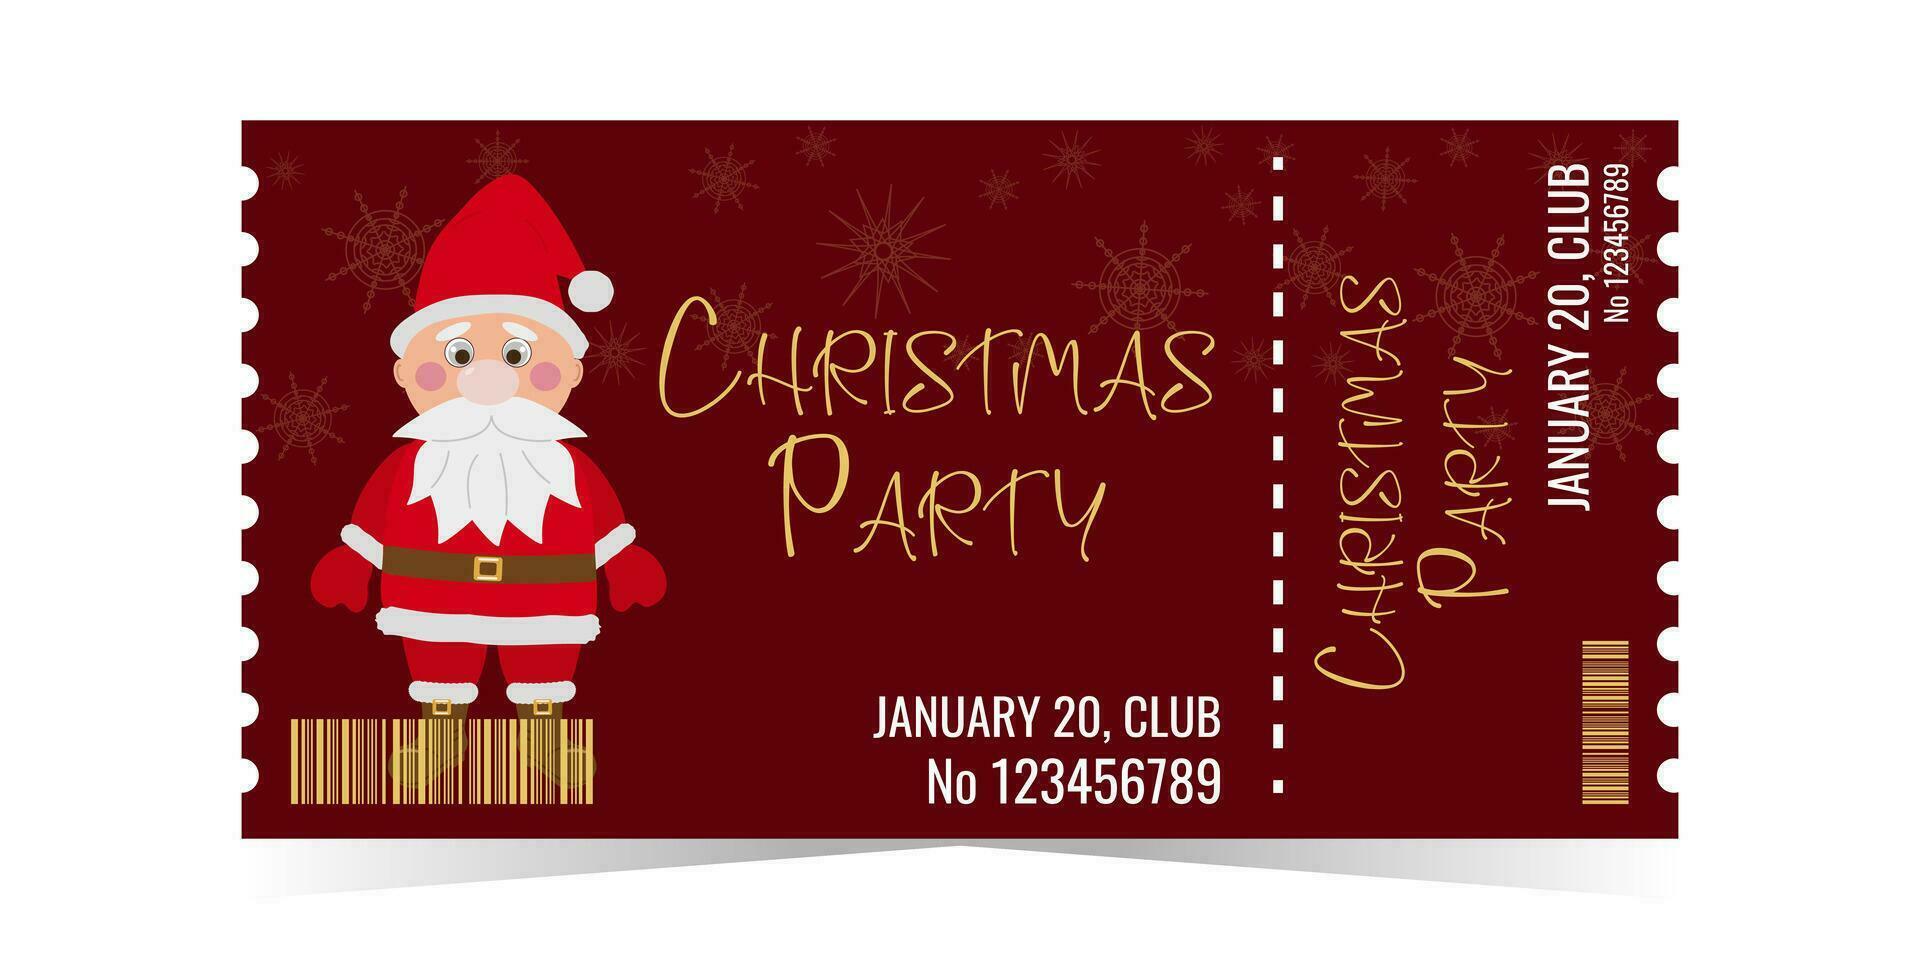 Christmas Party Ticket layout template card design vector